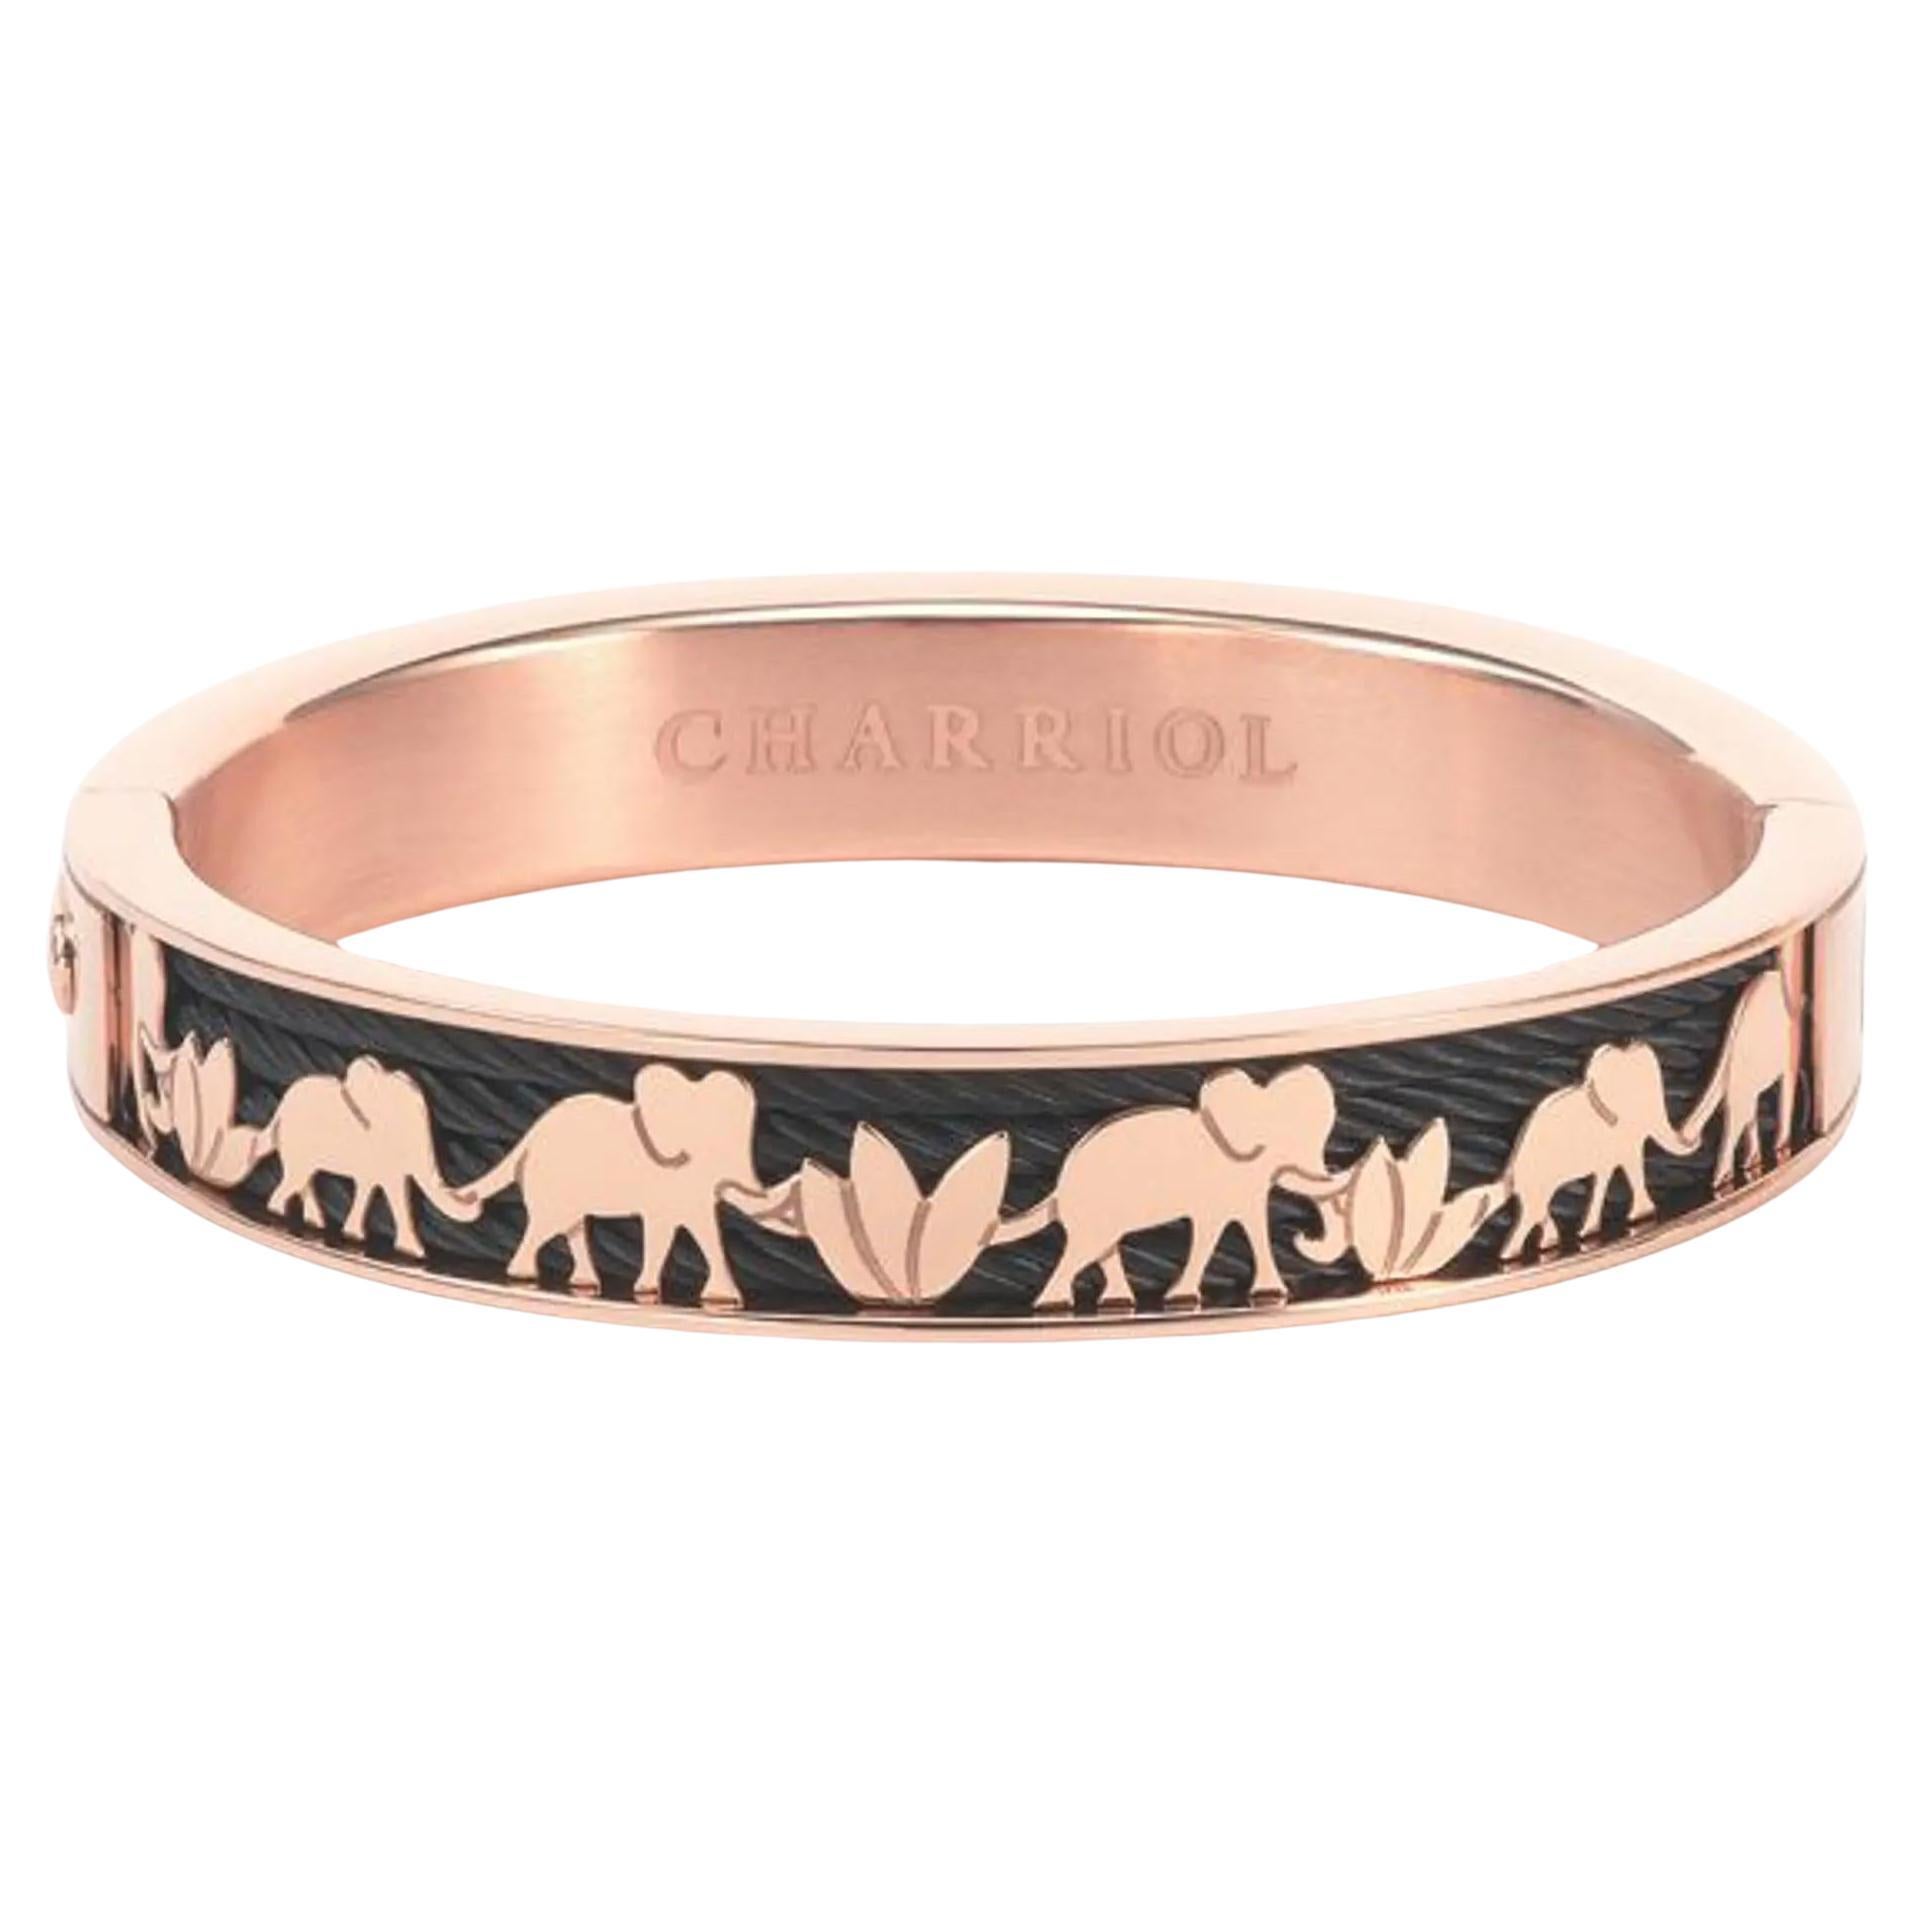 Charriol Forever Elephant Rose Gold PVD Steel Bangle 04-302-1139-18 Size L For Sale